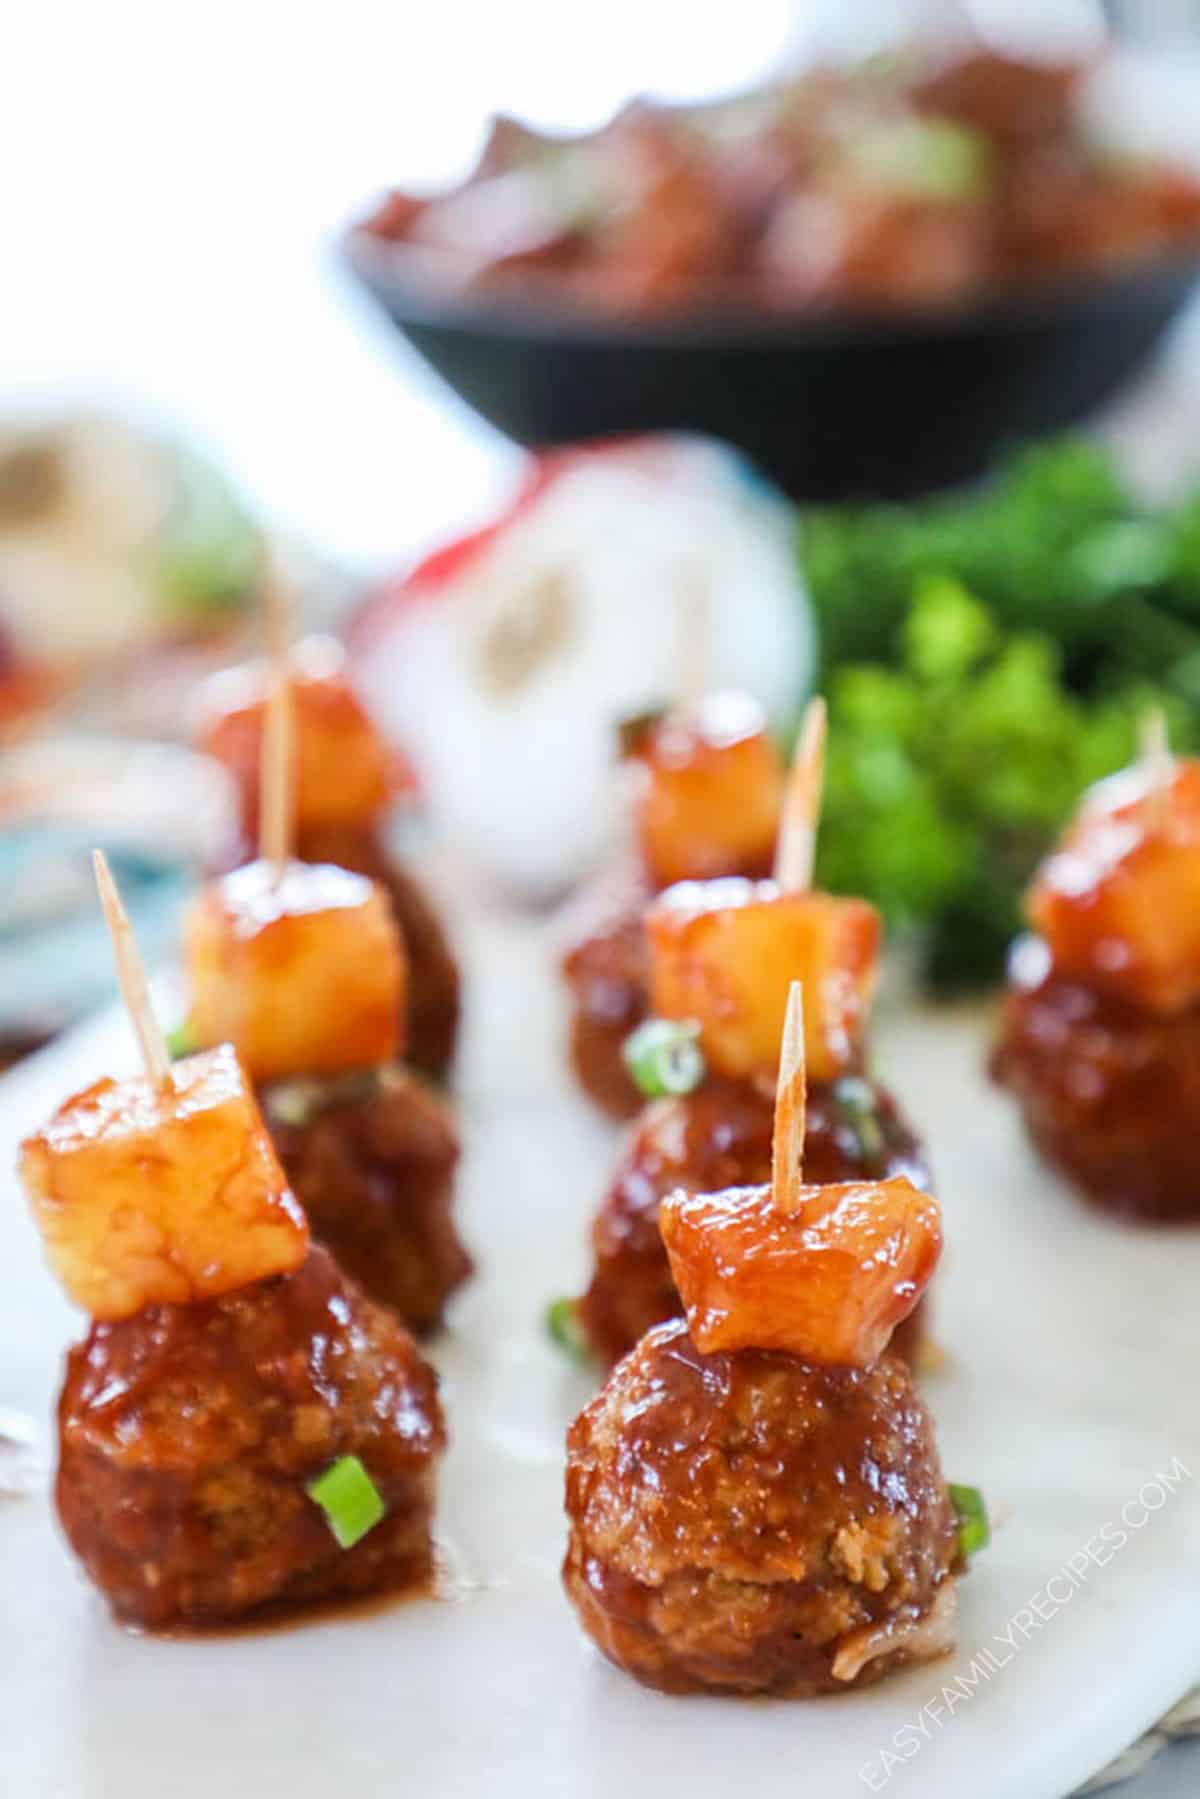 Hawaiian Meatballs and pineapple on a toothpick prepared as an appetizer